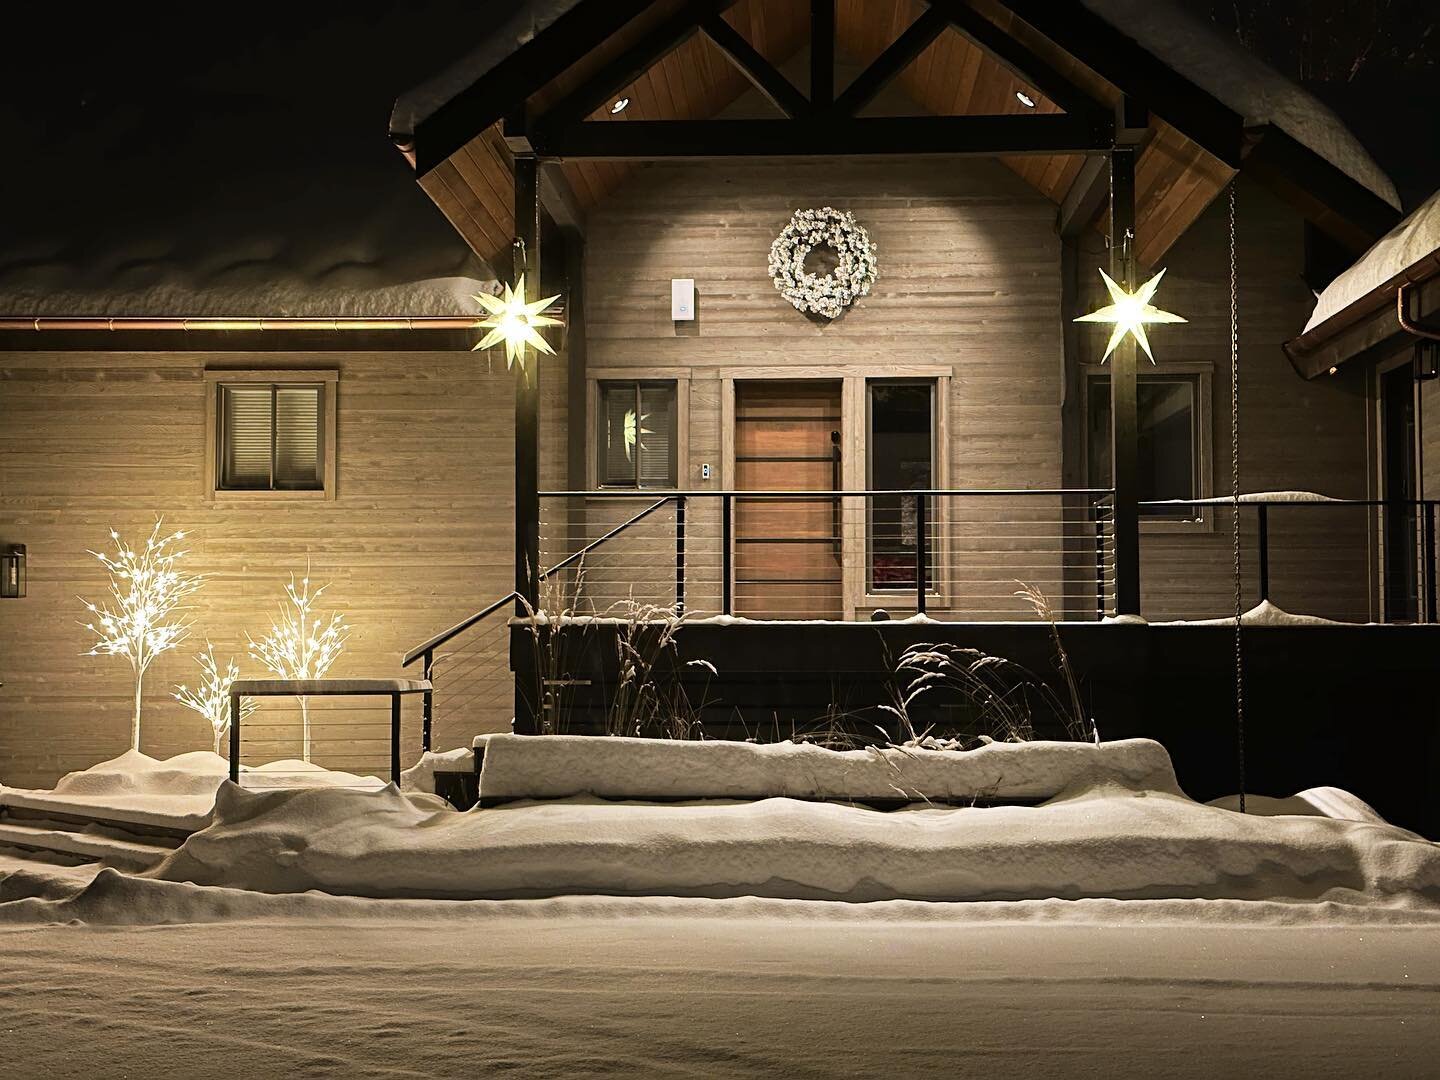 It&rsquo;s a winter wonderland! Come join us, the snow&rsquo;s fine!
Message for details on how to book an epic ski vacation. 
#whitefishmontana #skiwhitefish #vacation  #vacationrental